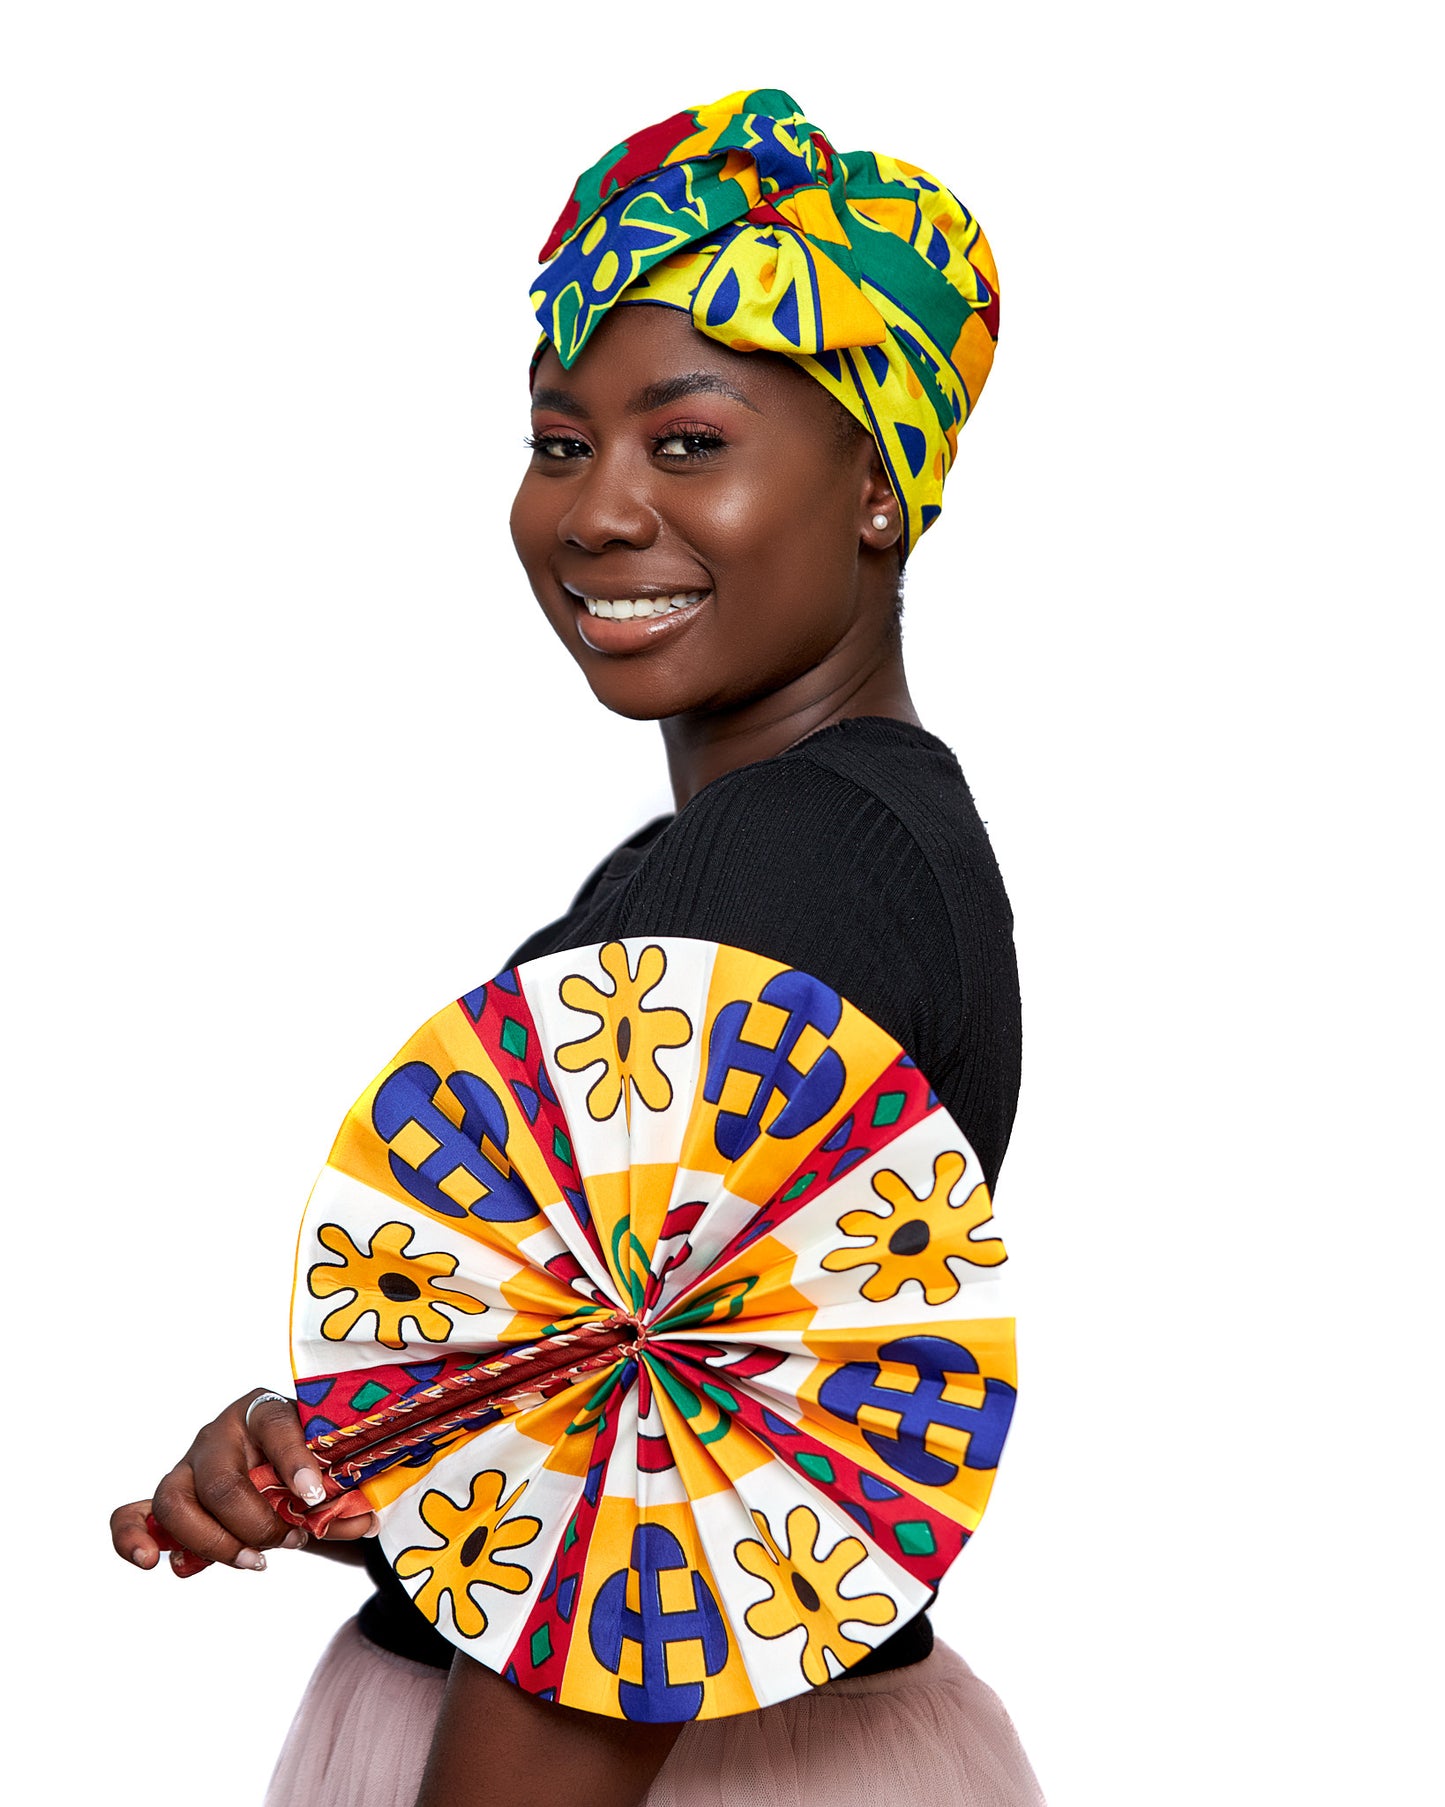 Ghanaian Kente Wax Print Made of Yellow,Gold, Red,Green And  Blue Blend of Beautiful Colours And Pattern With Adinkira Symbols, Hand Made Elastic Silklined Bonnet With Band